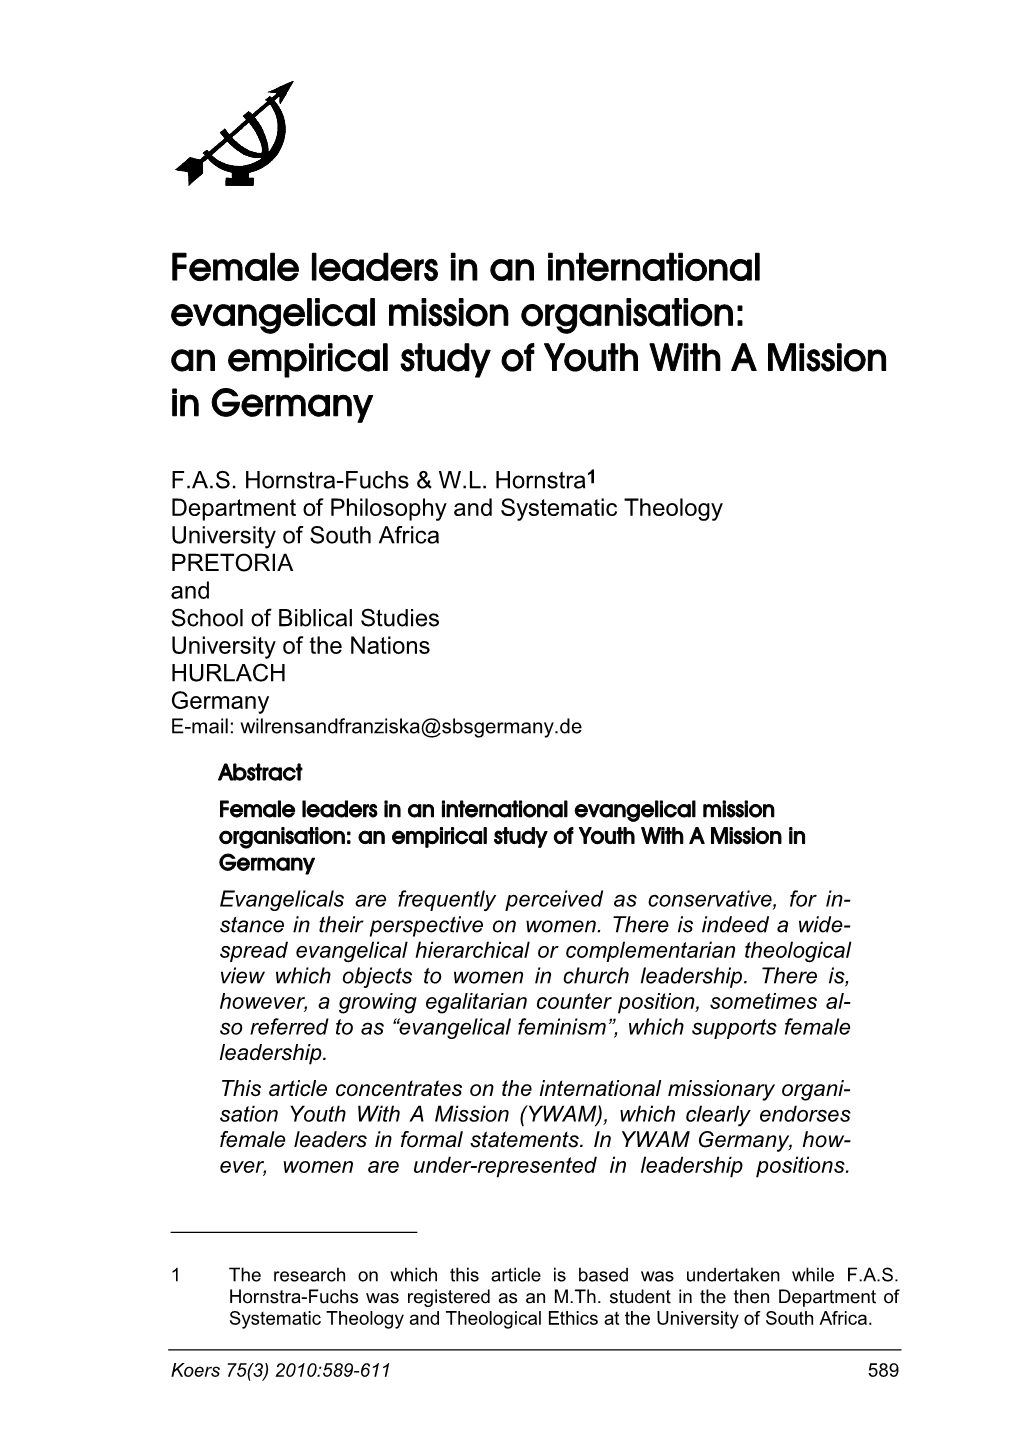 Female Leaders in an International Evangelical Mission Organisation: an Empirical Study of Youth with a Mission in Germany